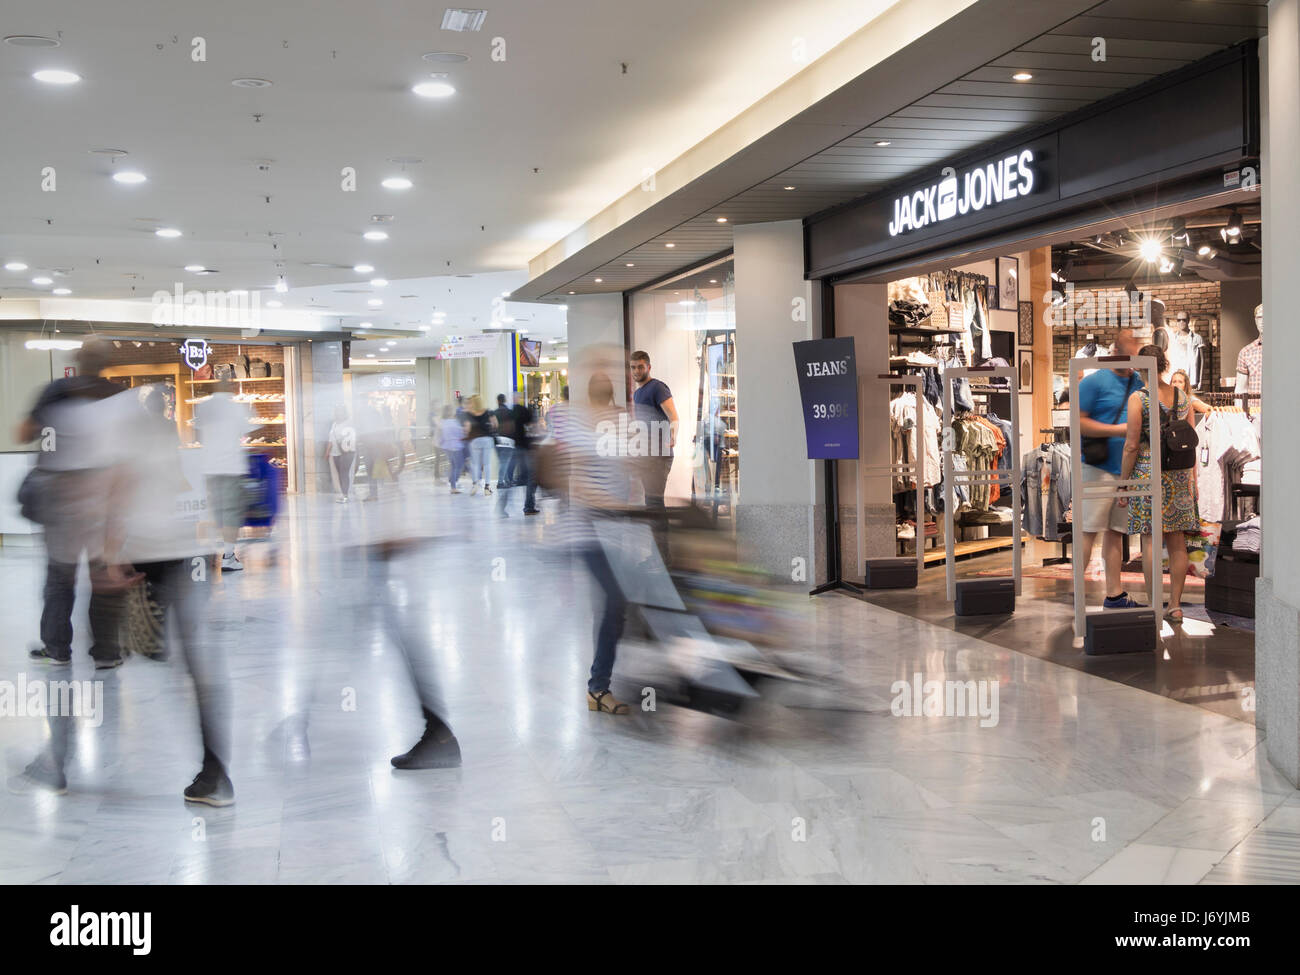 Jack & Jones clothing store in shopping mall in Spain Stock Photo